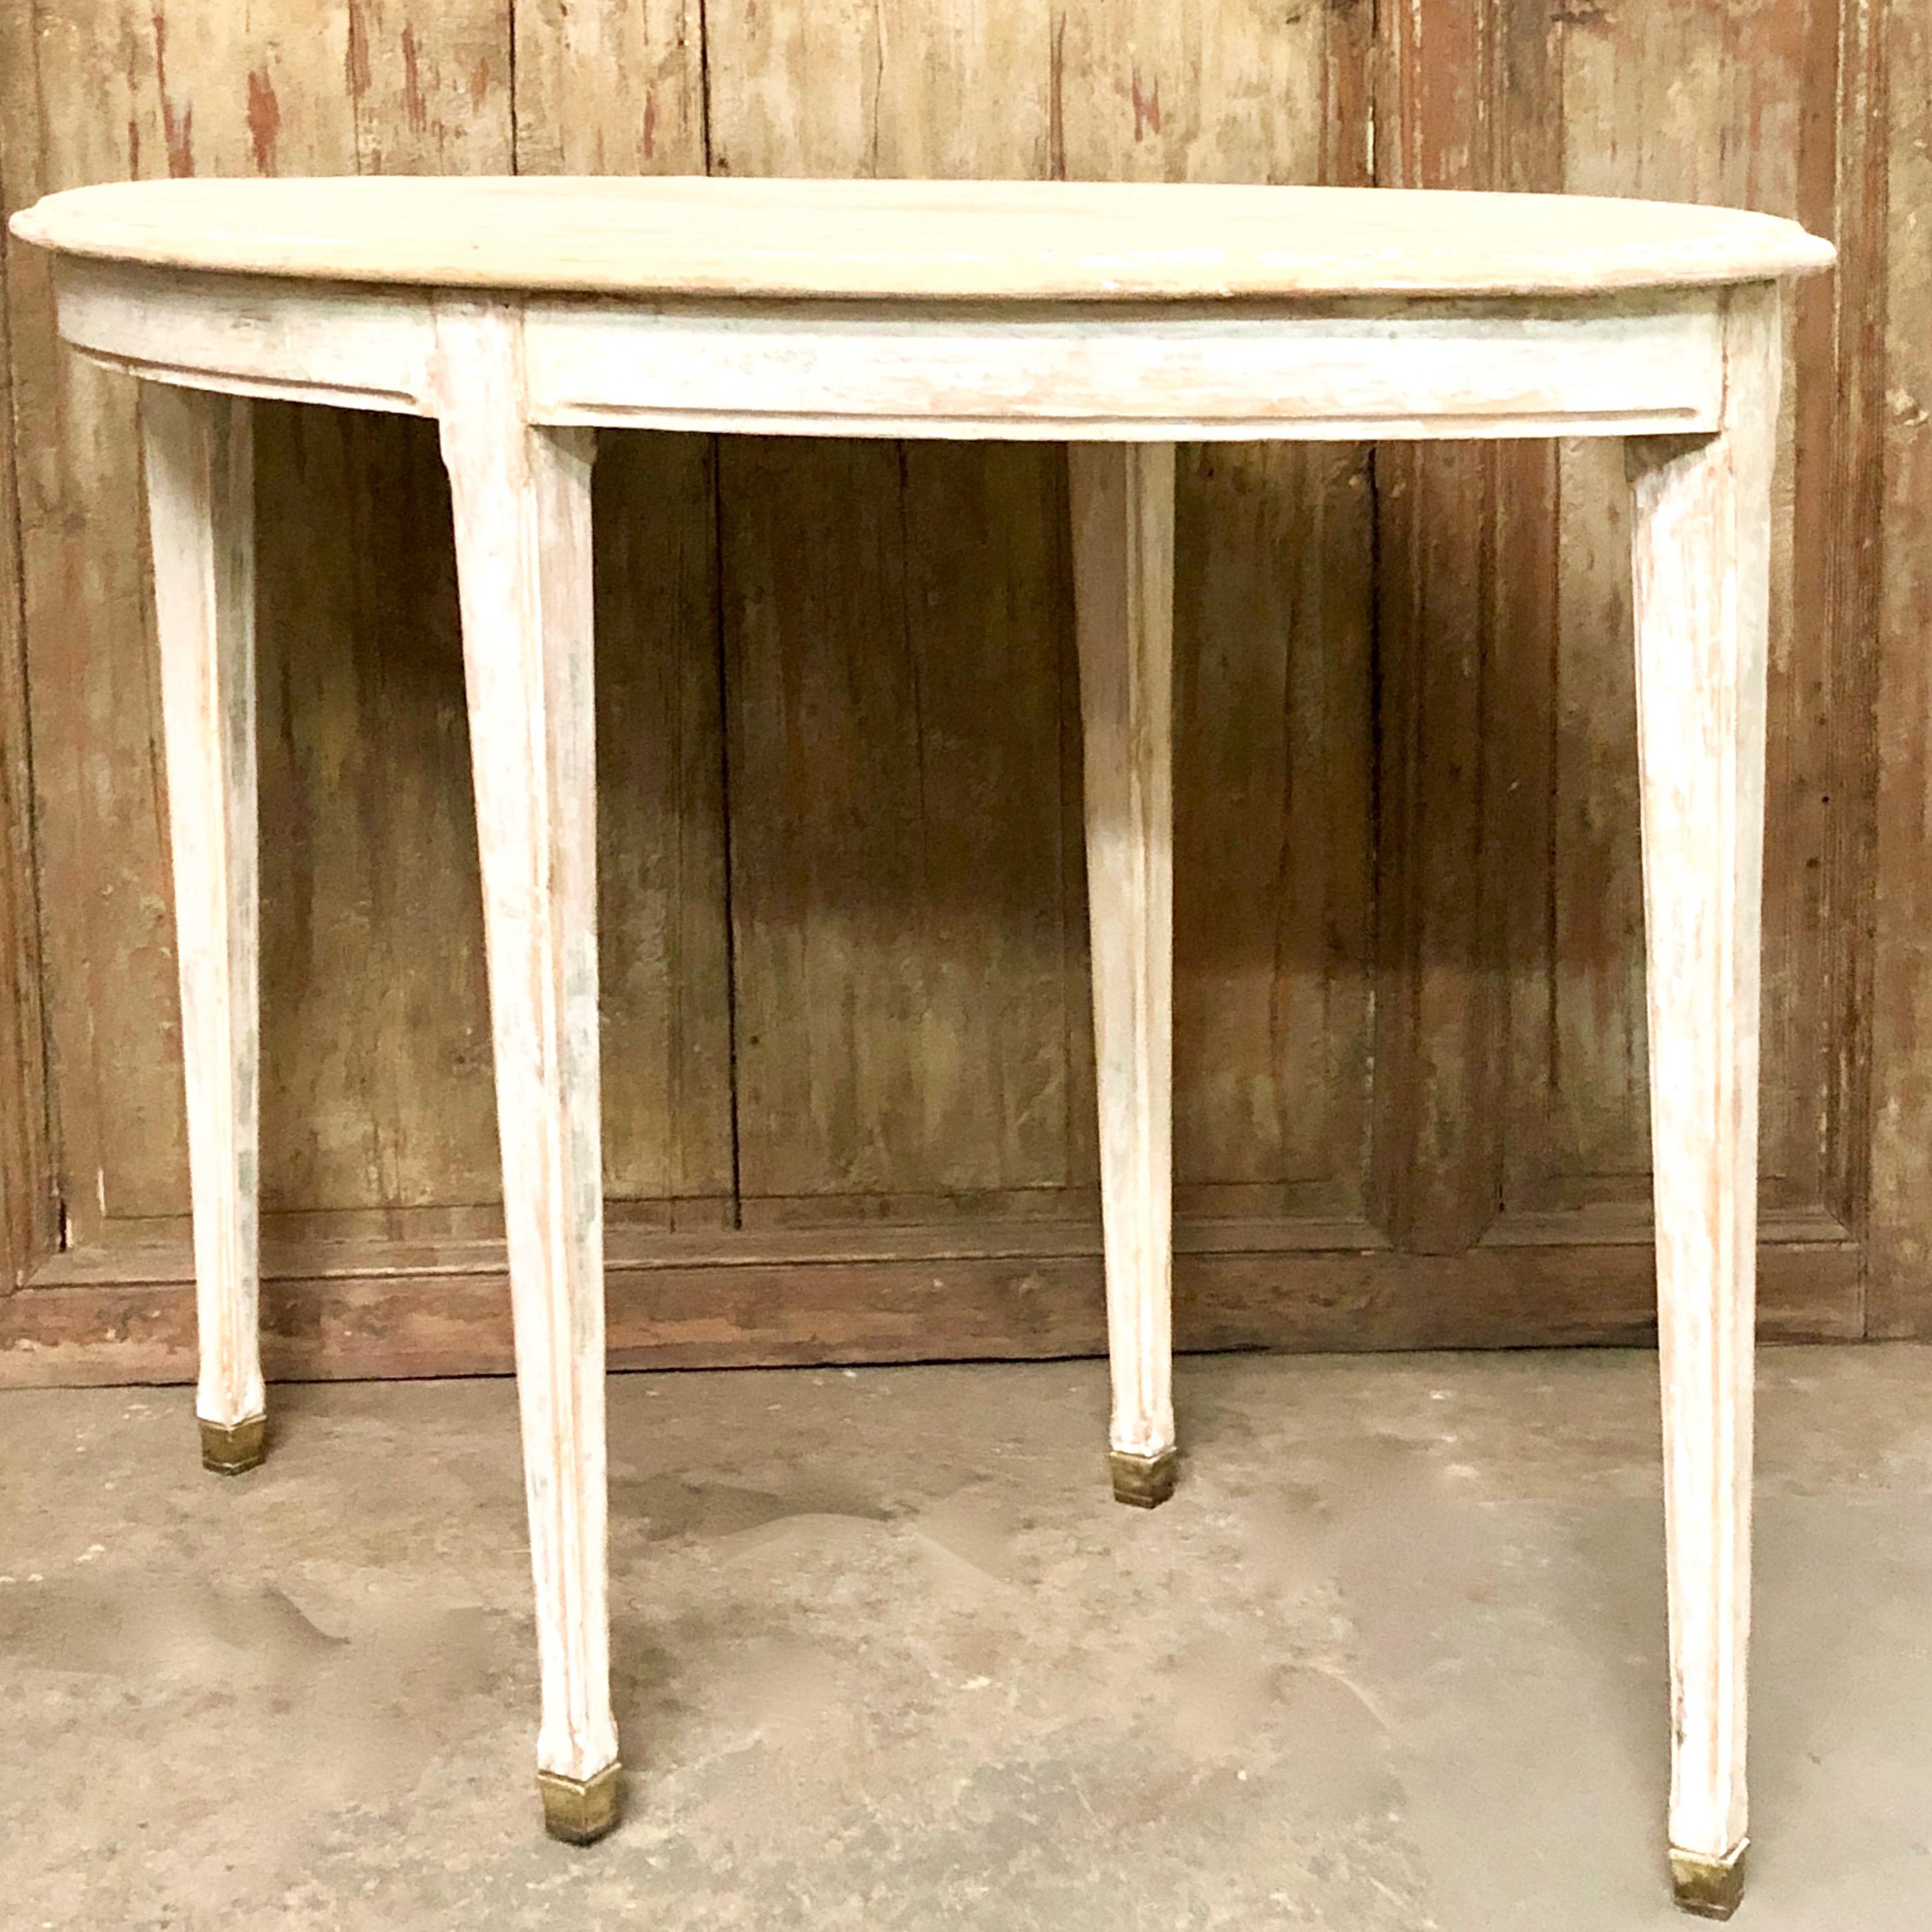 A charming 19th century French oval table scraped multiply layers of old paint with slender tapered legs and brass fittings.
More than ever, we selected the best, the rarest, the unusual, the spectacular, the most charming, what makes people